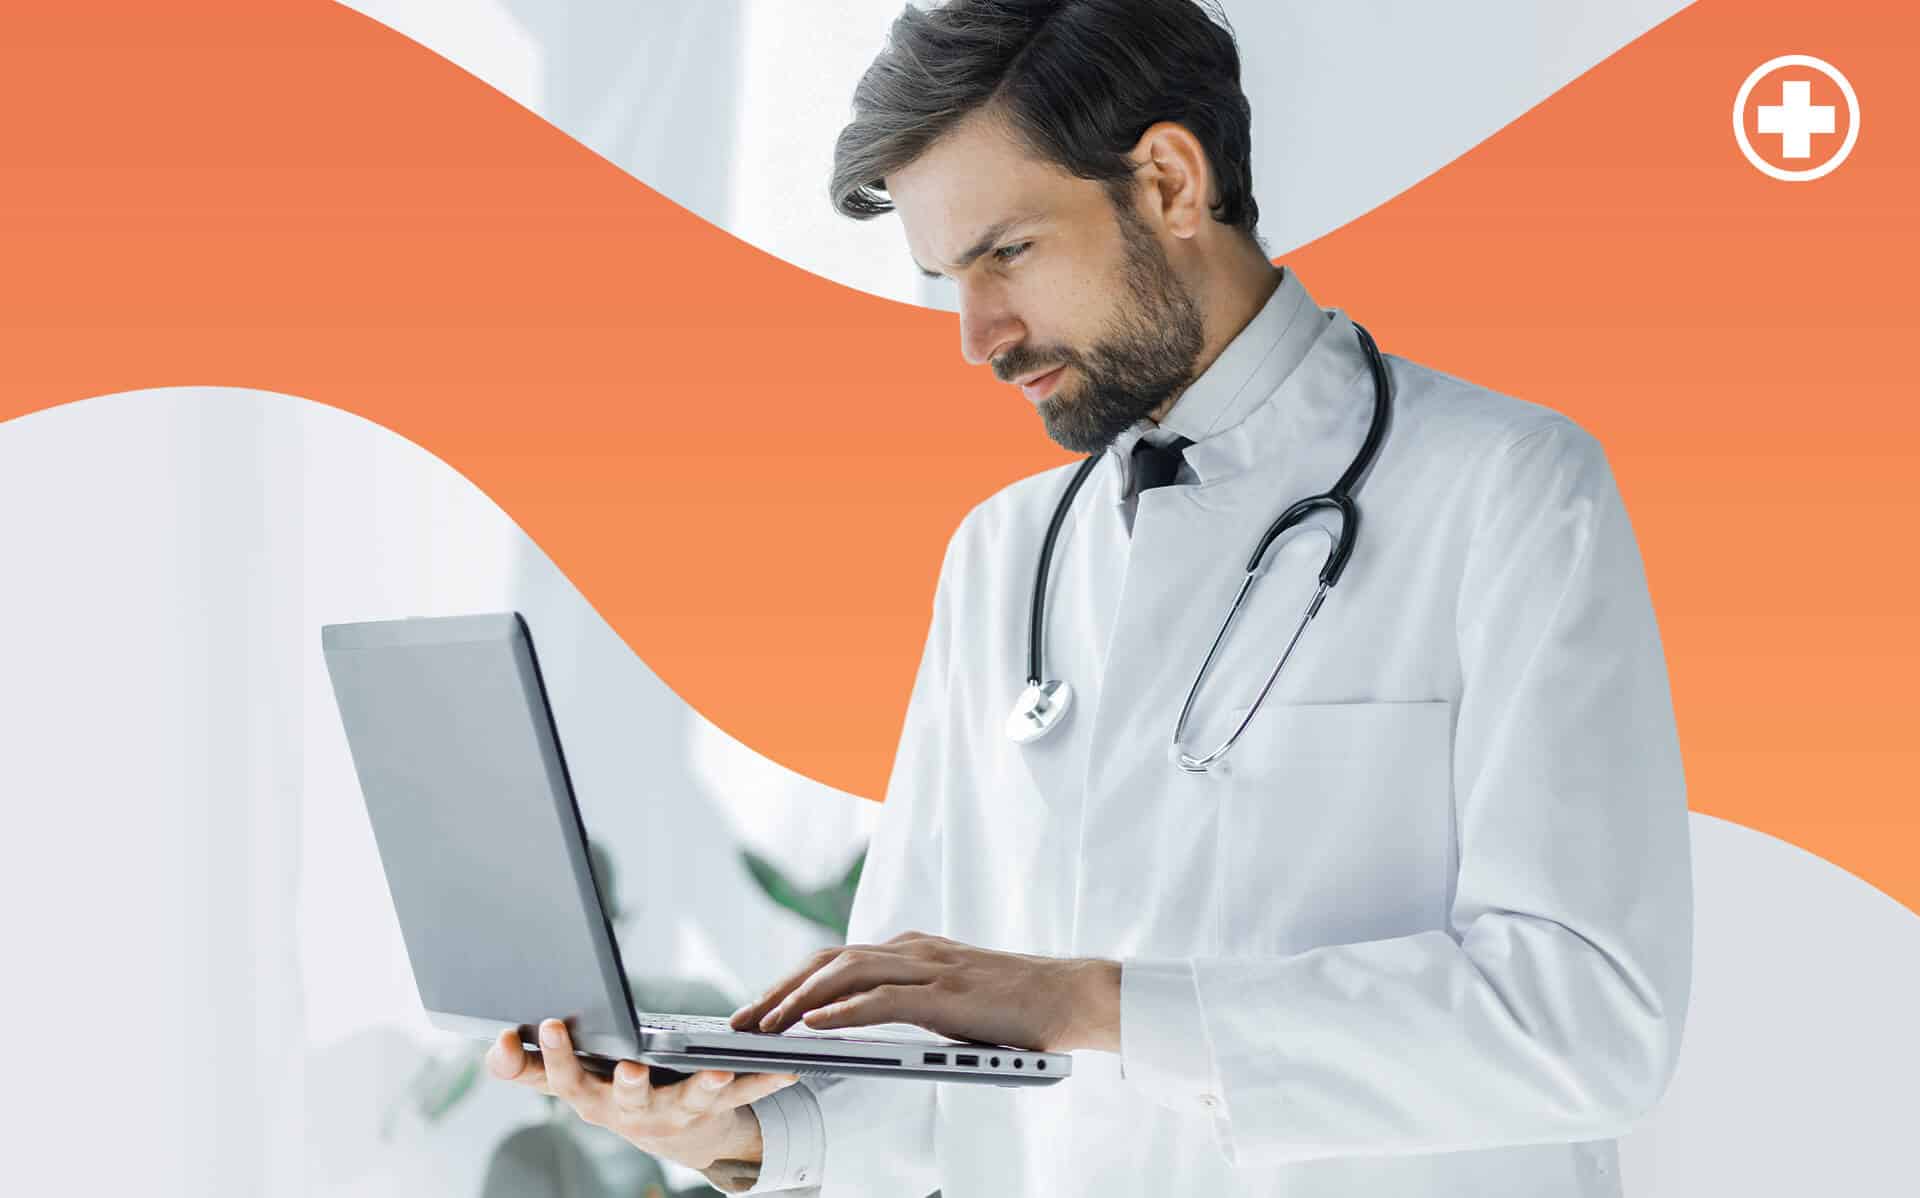 Medic with a laptop in his hands having an orange background.